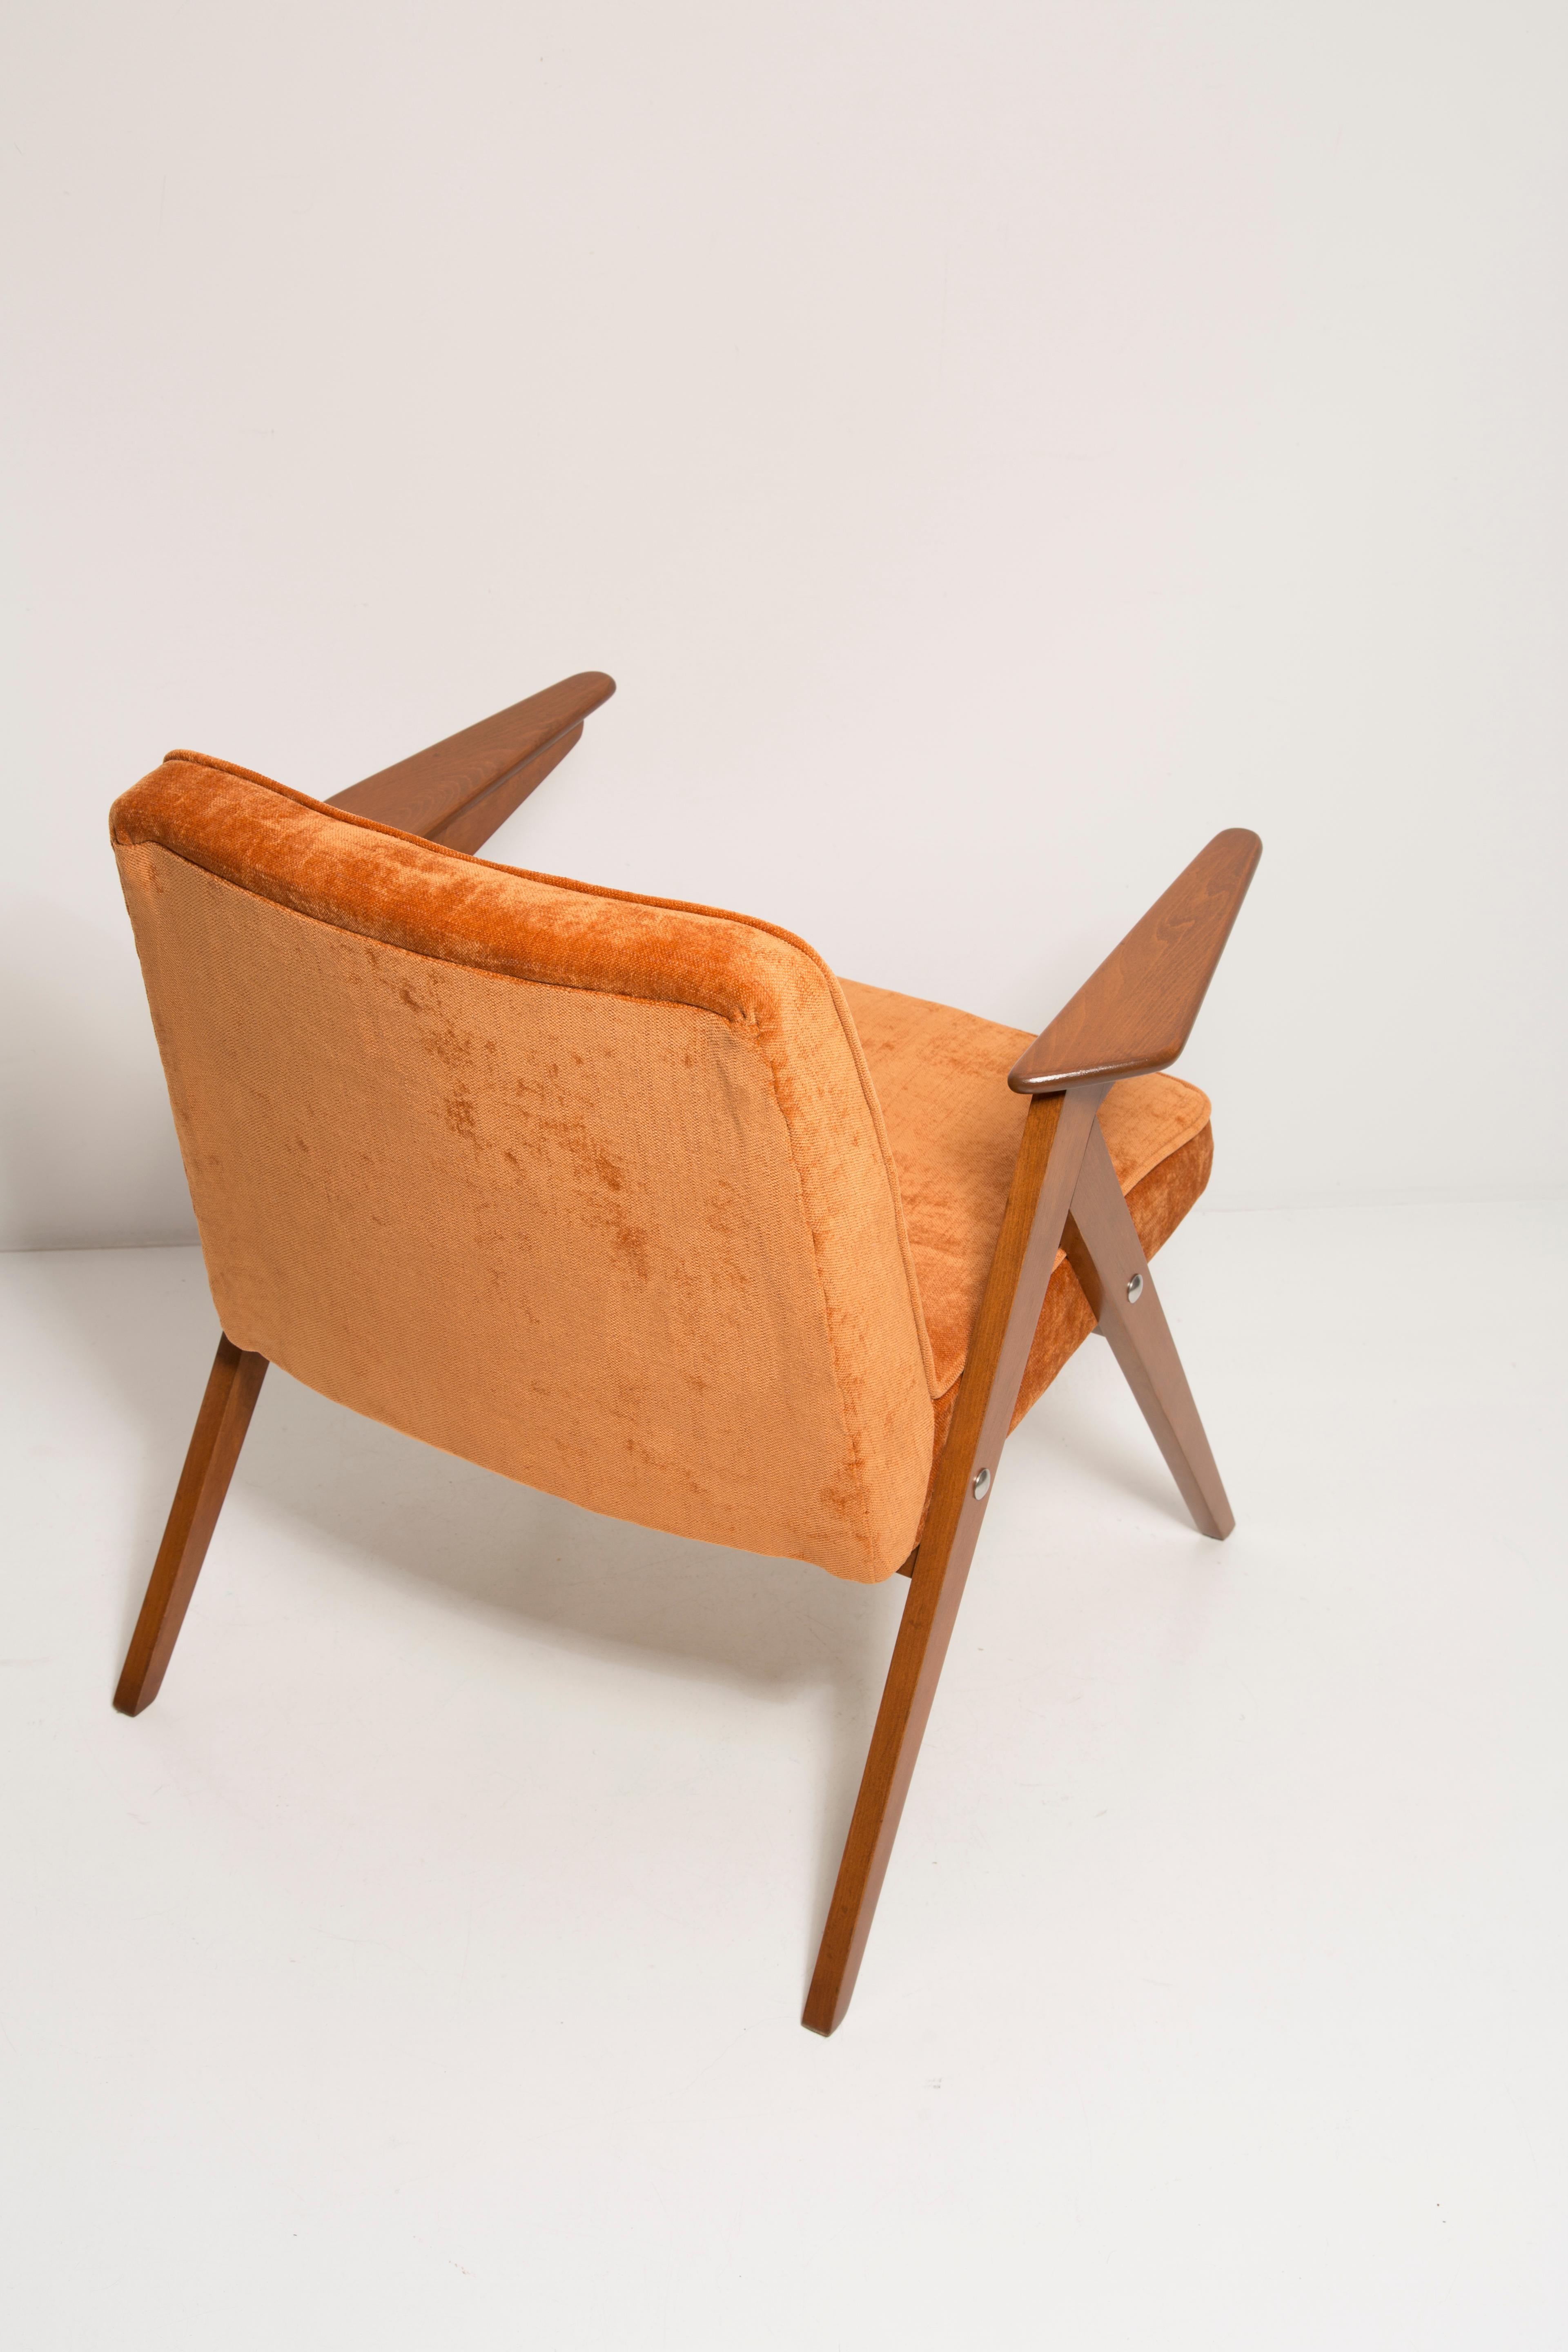 Set of Two Midcentury Orange Bunny Armchairs by Jozef Chierowski, Poland, 1960s For Sale 5